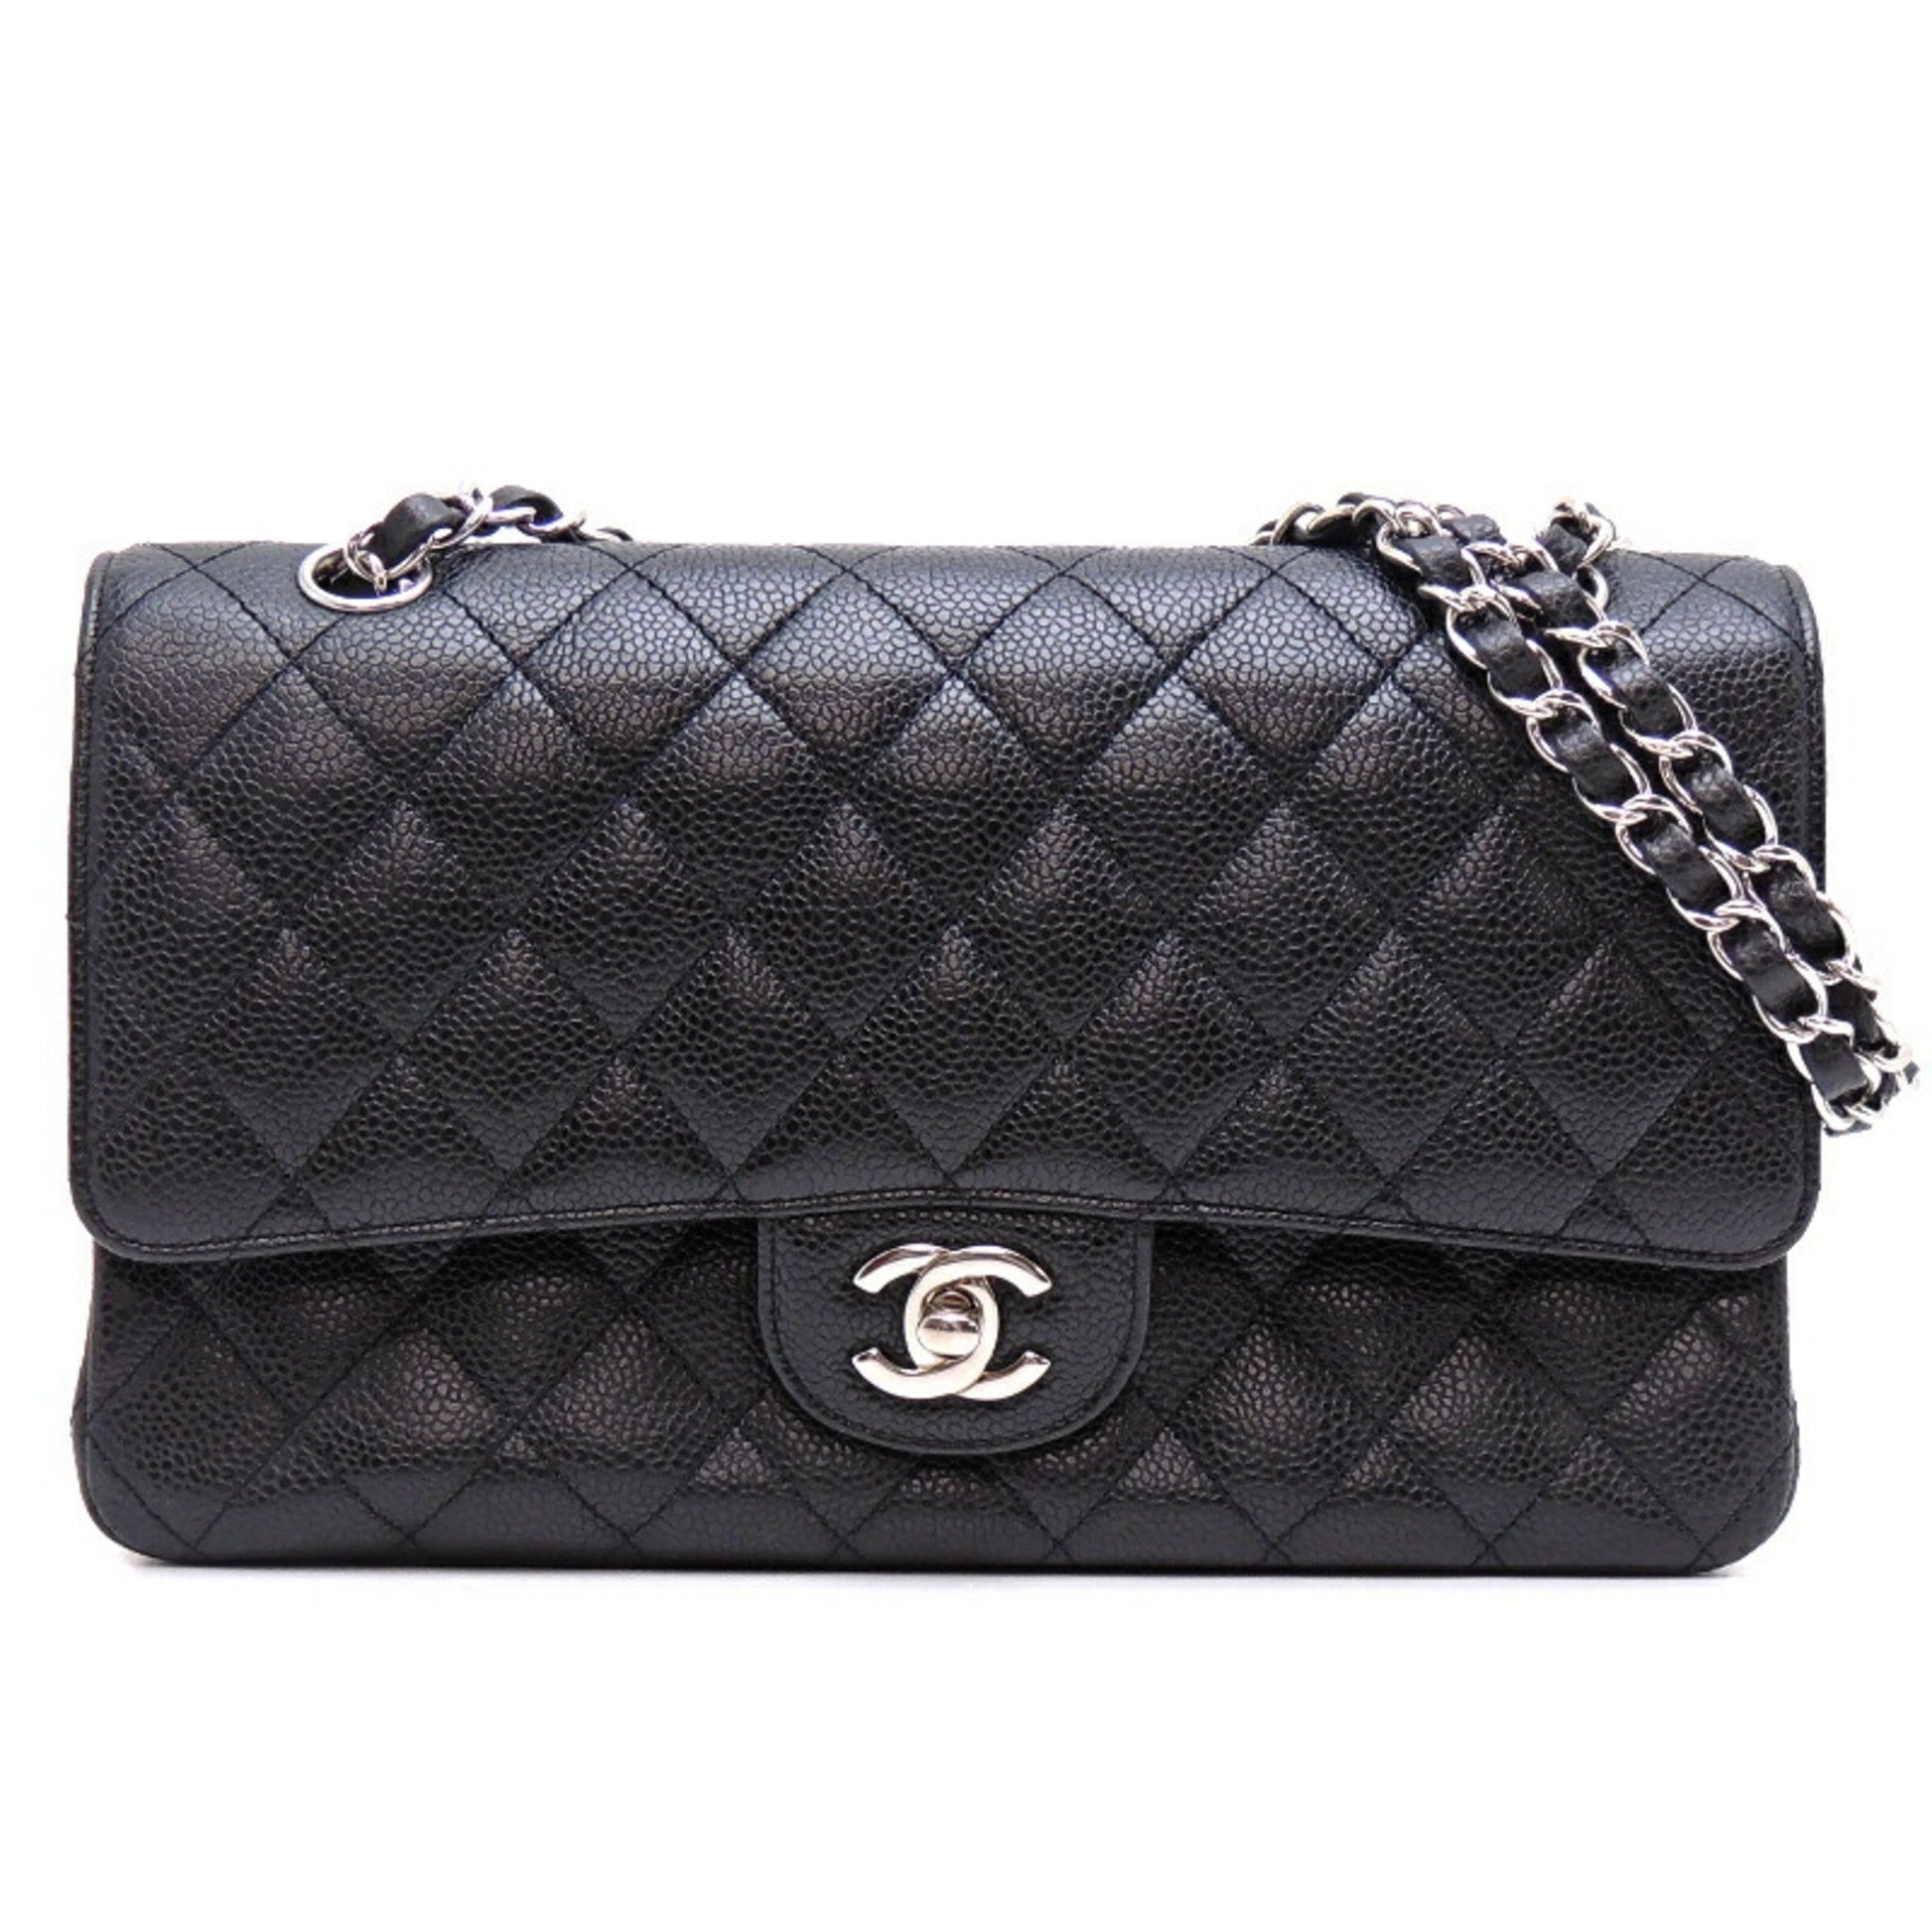 Shop CHANEL MATELASSE Casual Style 2WAY Plain Leather Party Style Elegant  Style by hirobuyer